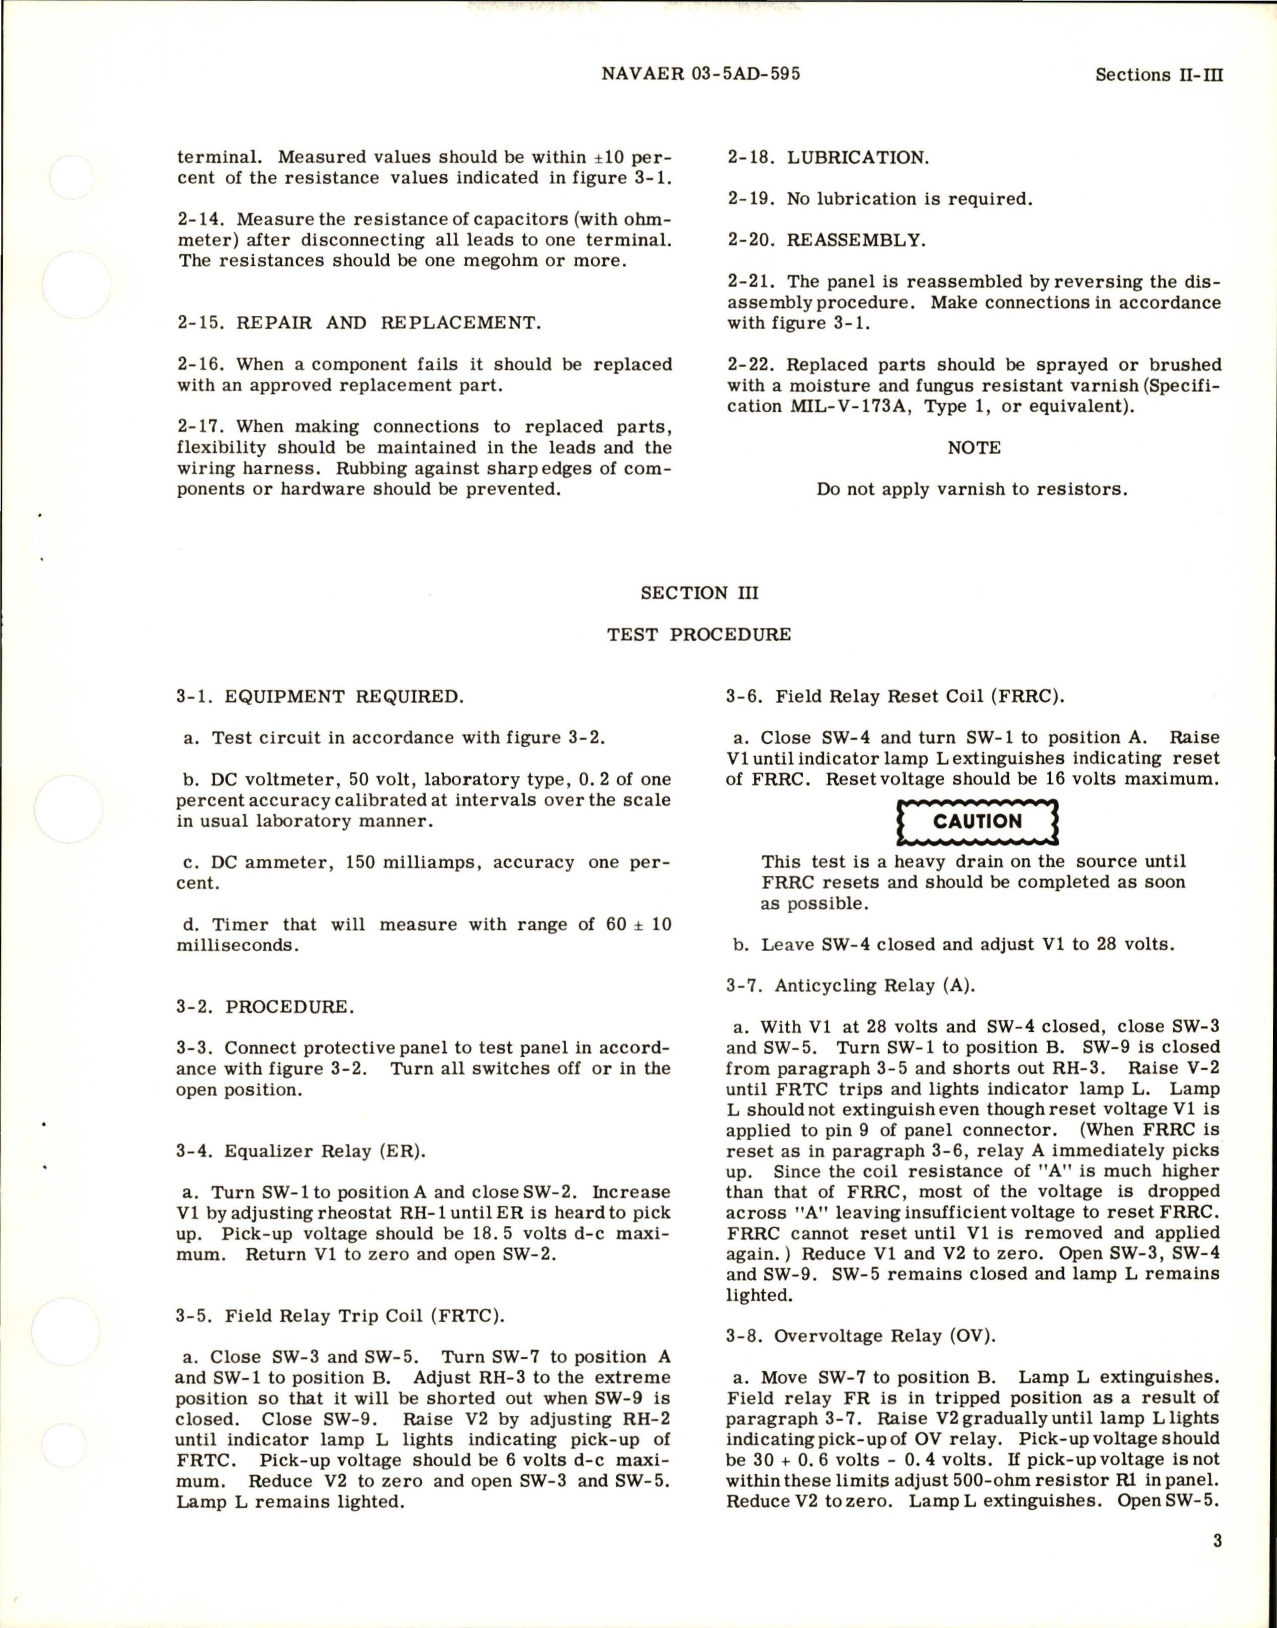 Sample page 7 from AirCorps Library document: Overhaul Instructions for Overvoltage Protective Panel for DC Generator - Models CR2781M146D and CR2781M146F 